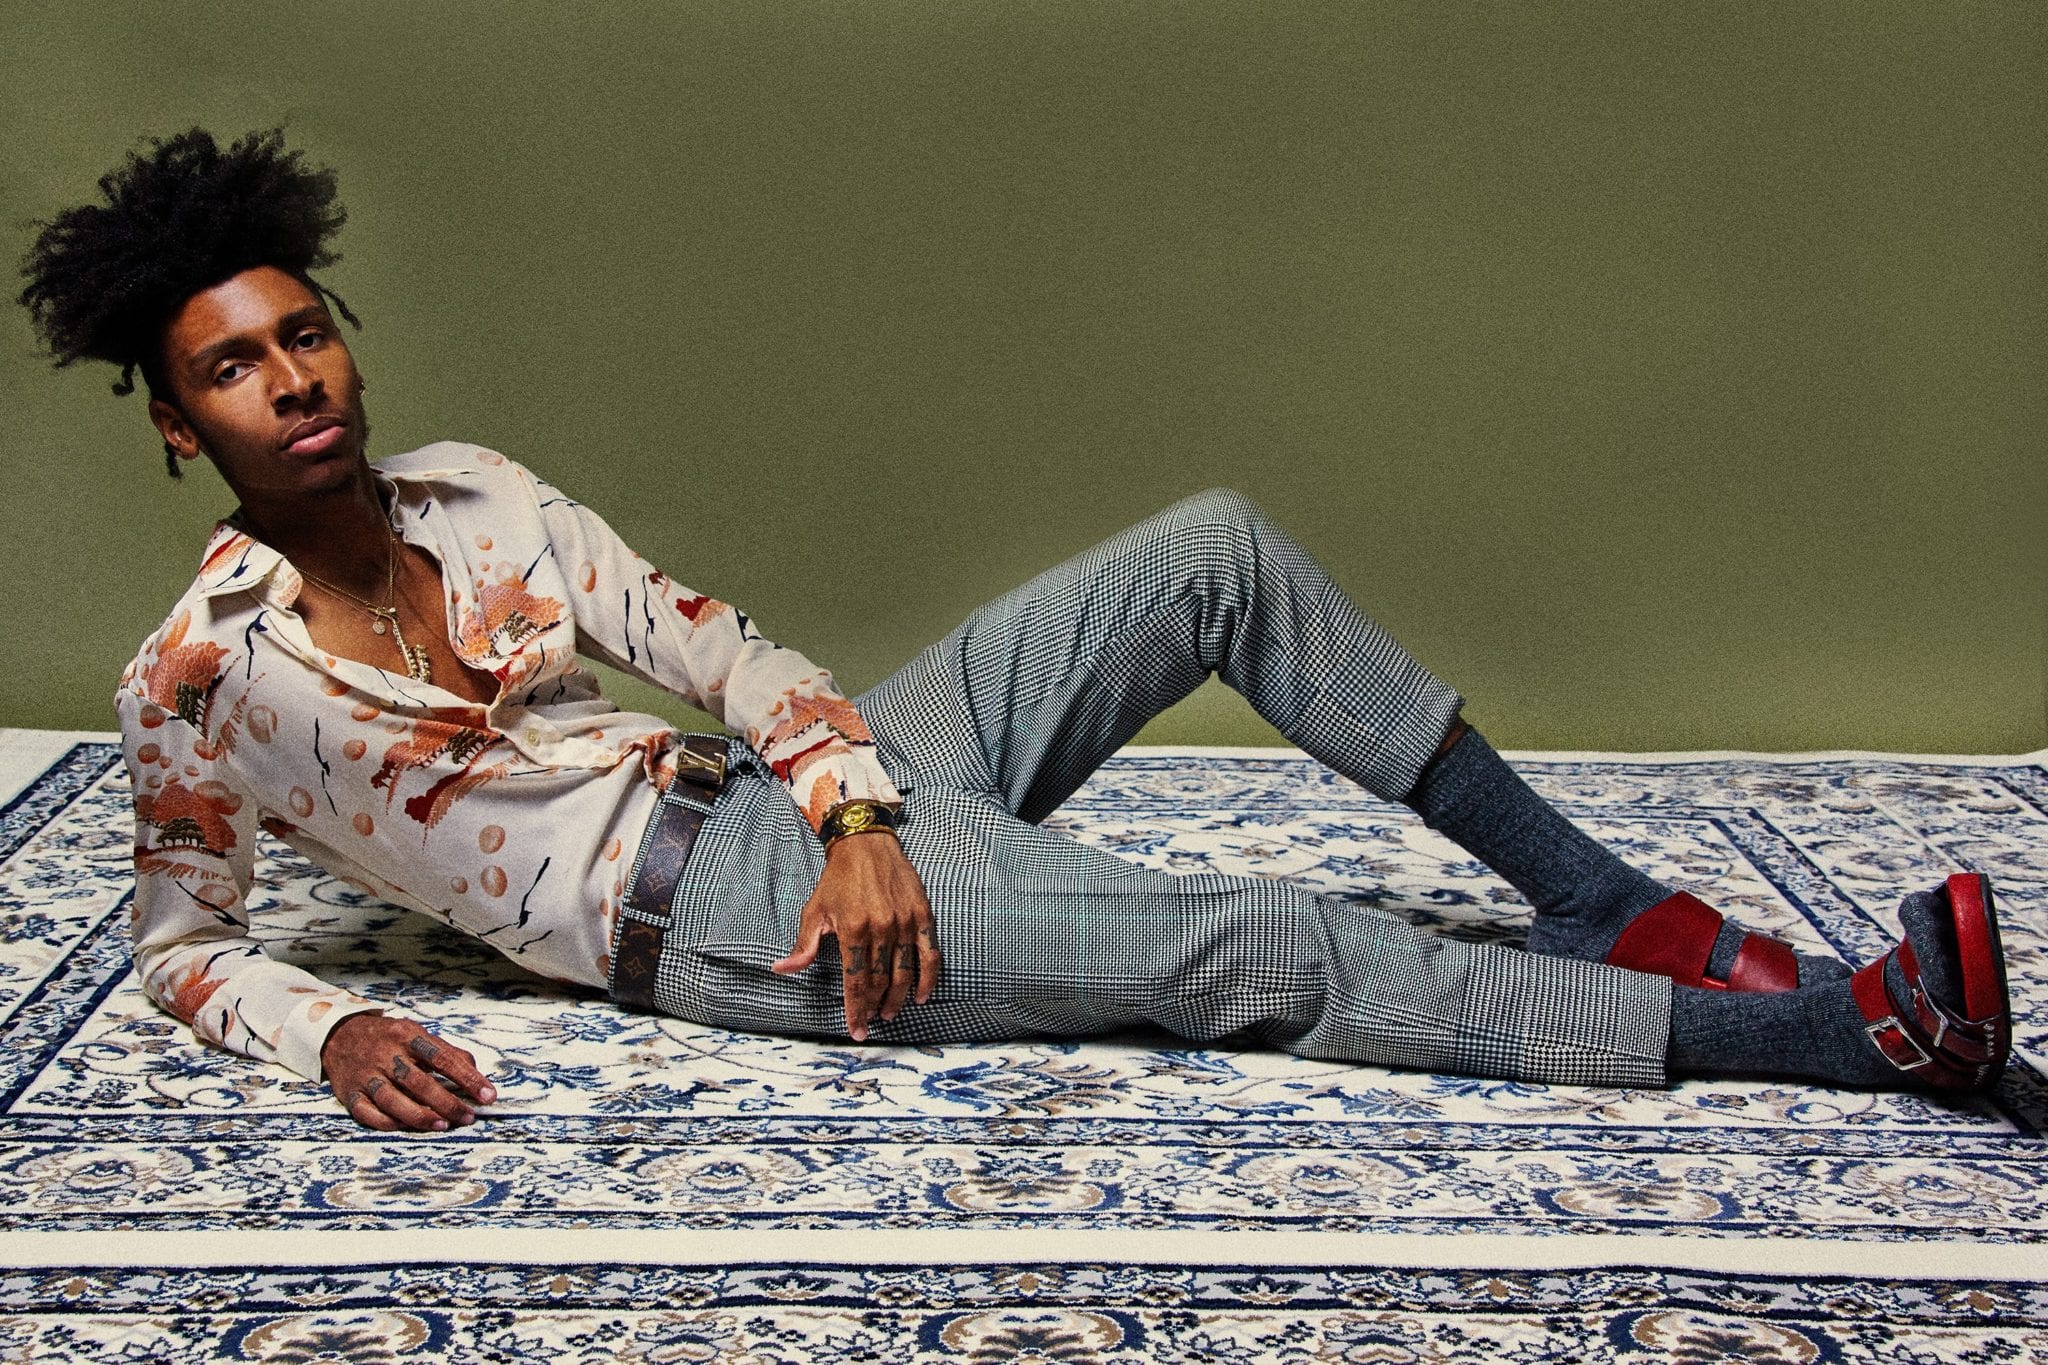 Uncreative Music Artist Profile Masego African American man laying on a carpet with red sandals and colorful outfit